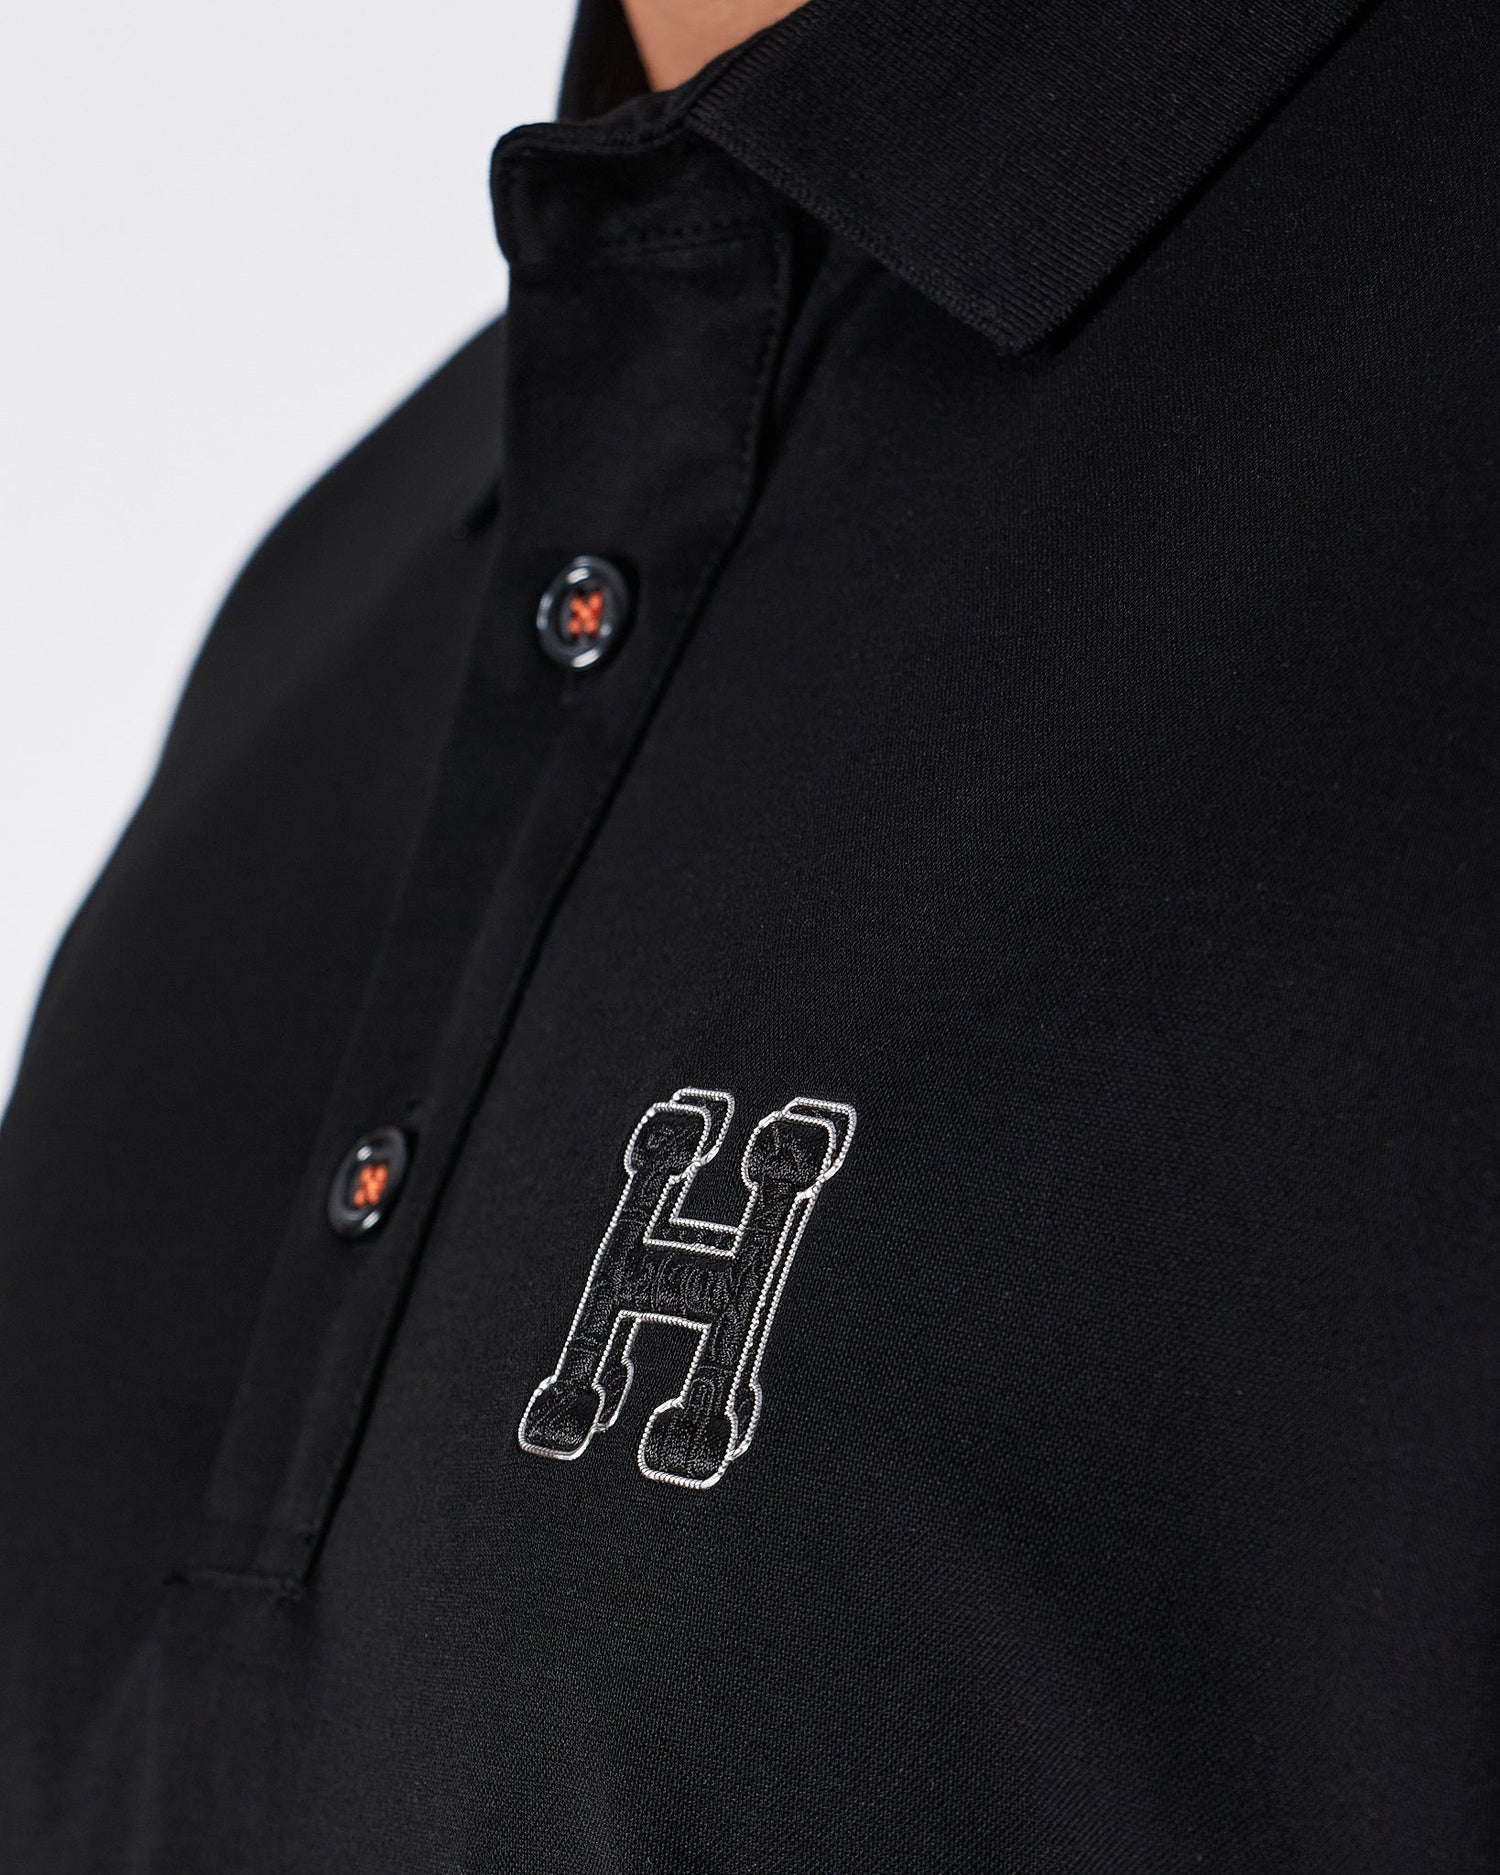 MOI OUTFIT-HER Embroidered Men Black Polo Shirt 75.90